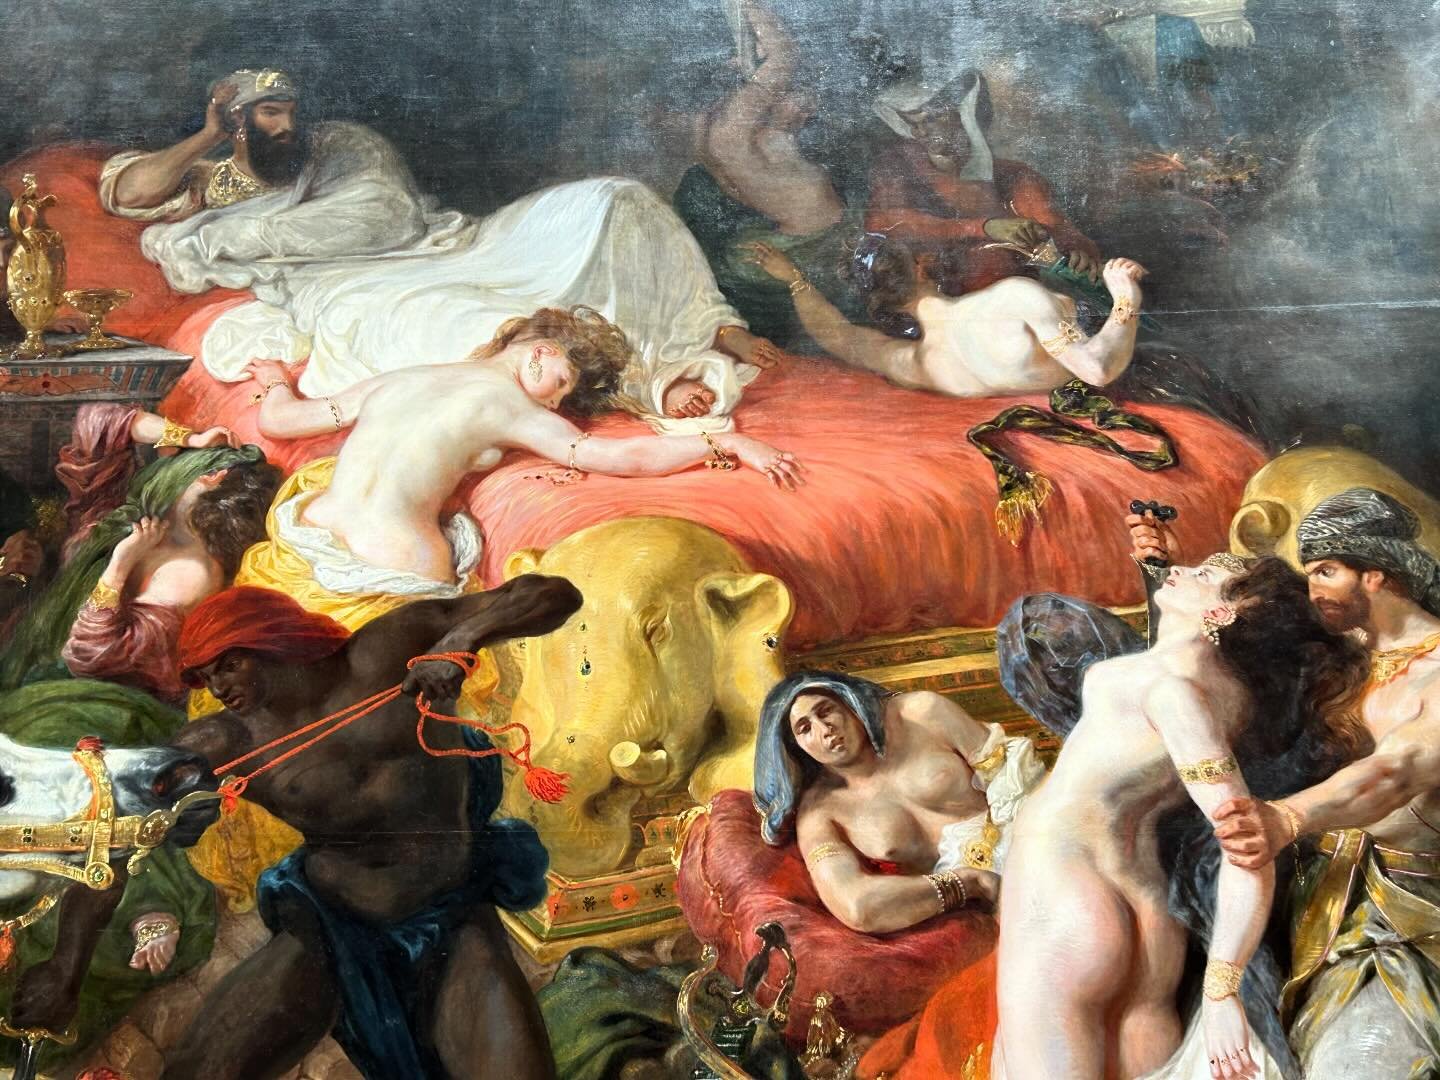 Details of Delacroix&rsquo;s Death of Sardanapalus, 1827, recently restored.  It&rsquo;s an explosion of color and bravura brushwork!! #delacroix #museedulouvre #romanticism #whatamakeover